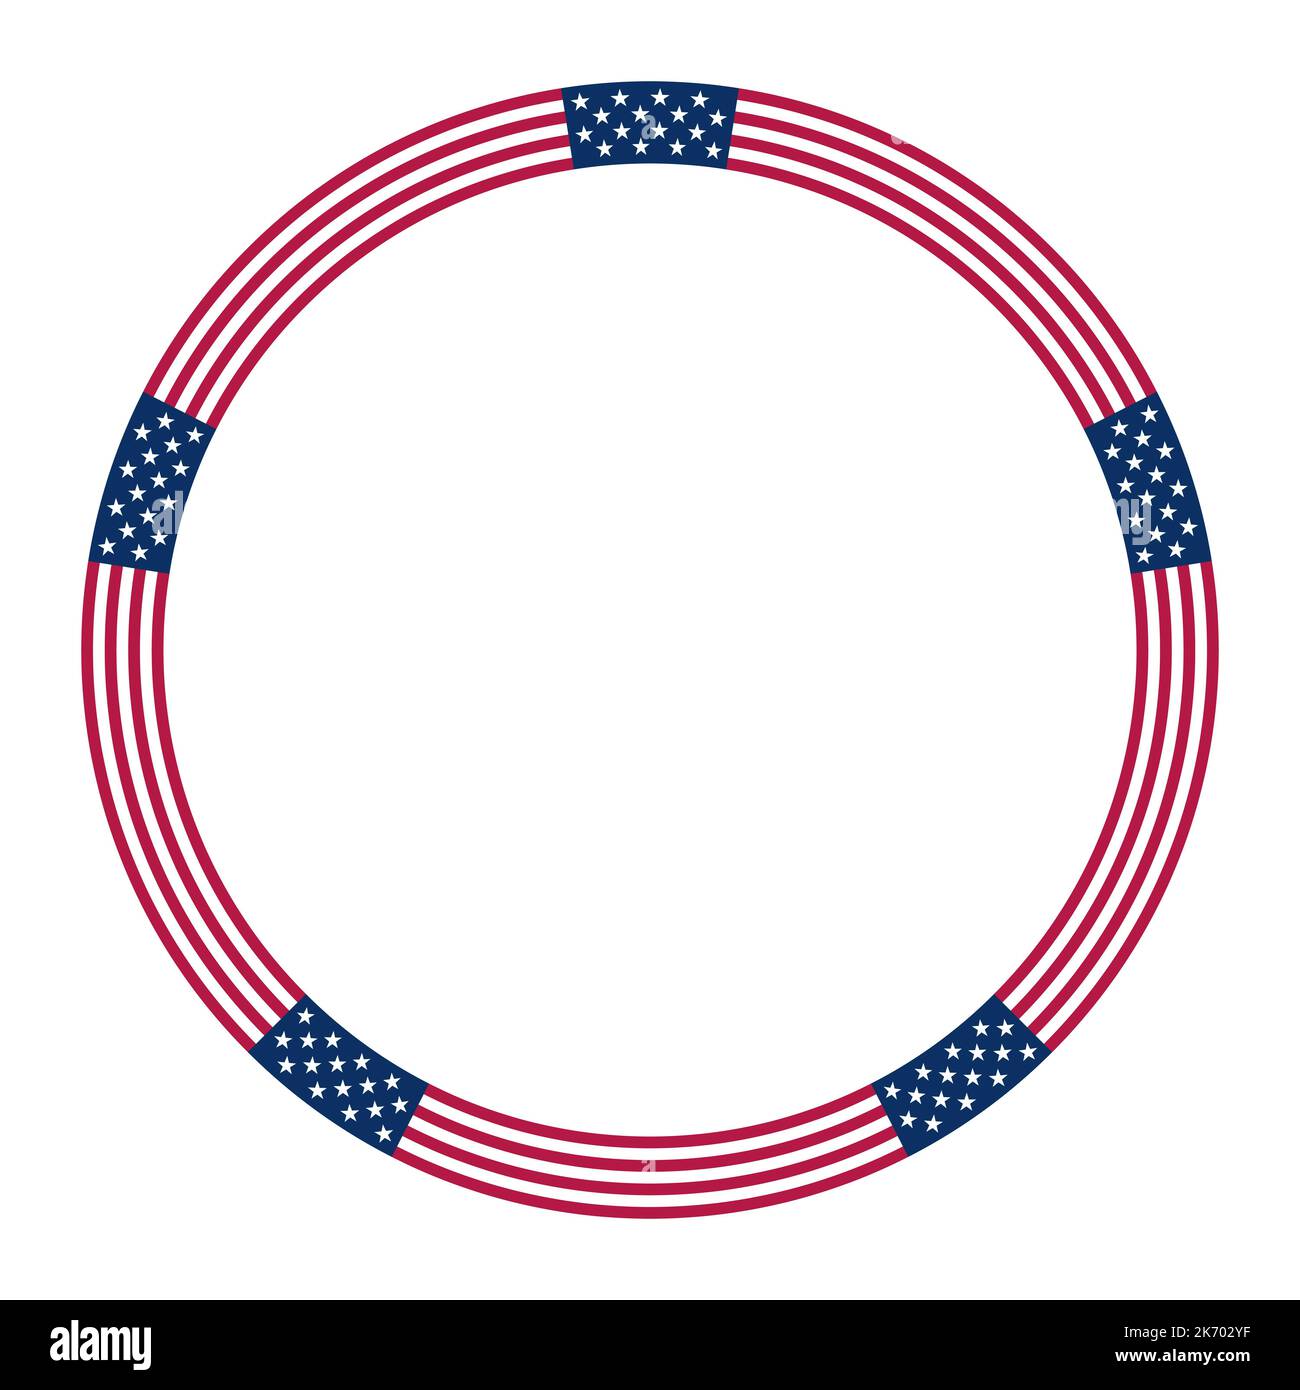 American flag motif, circle frame. Circular border made with stars and stripes pattern, based on the national flag of United States. Stock Photo